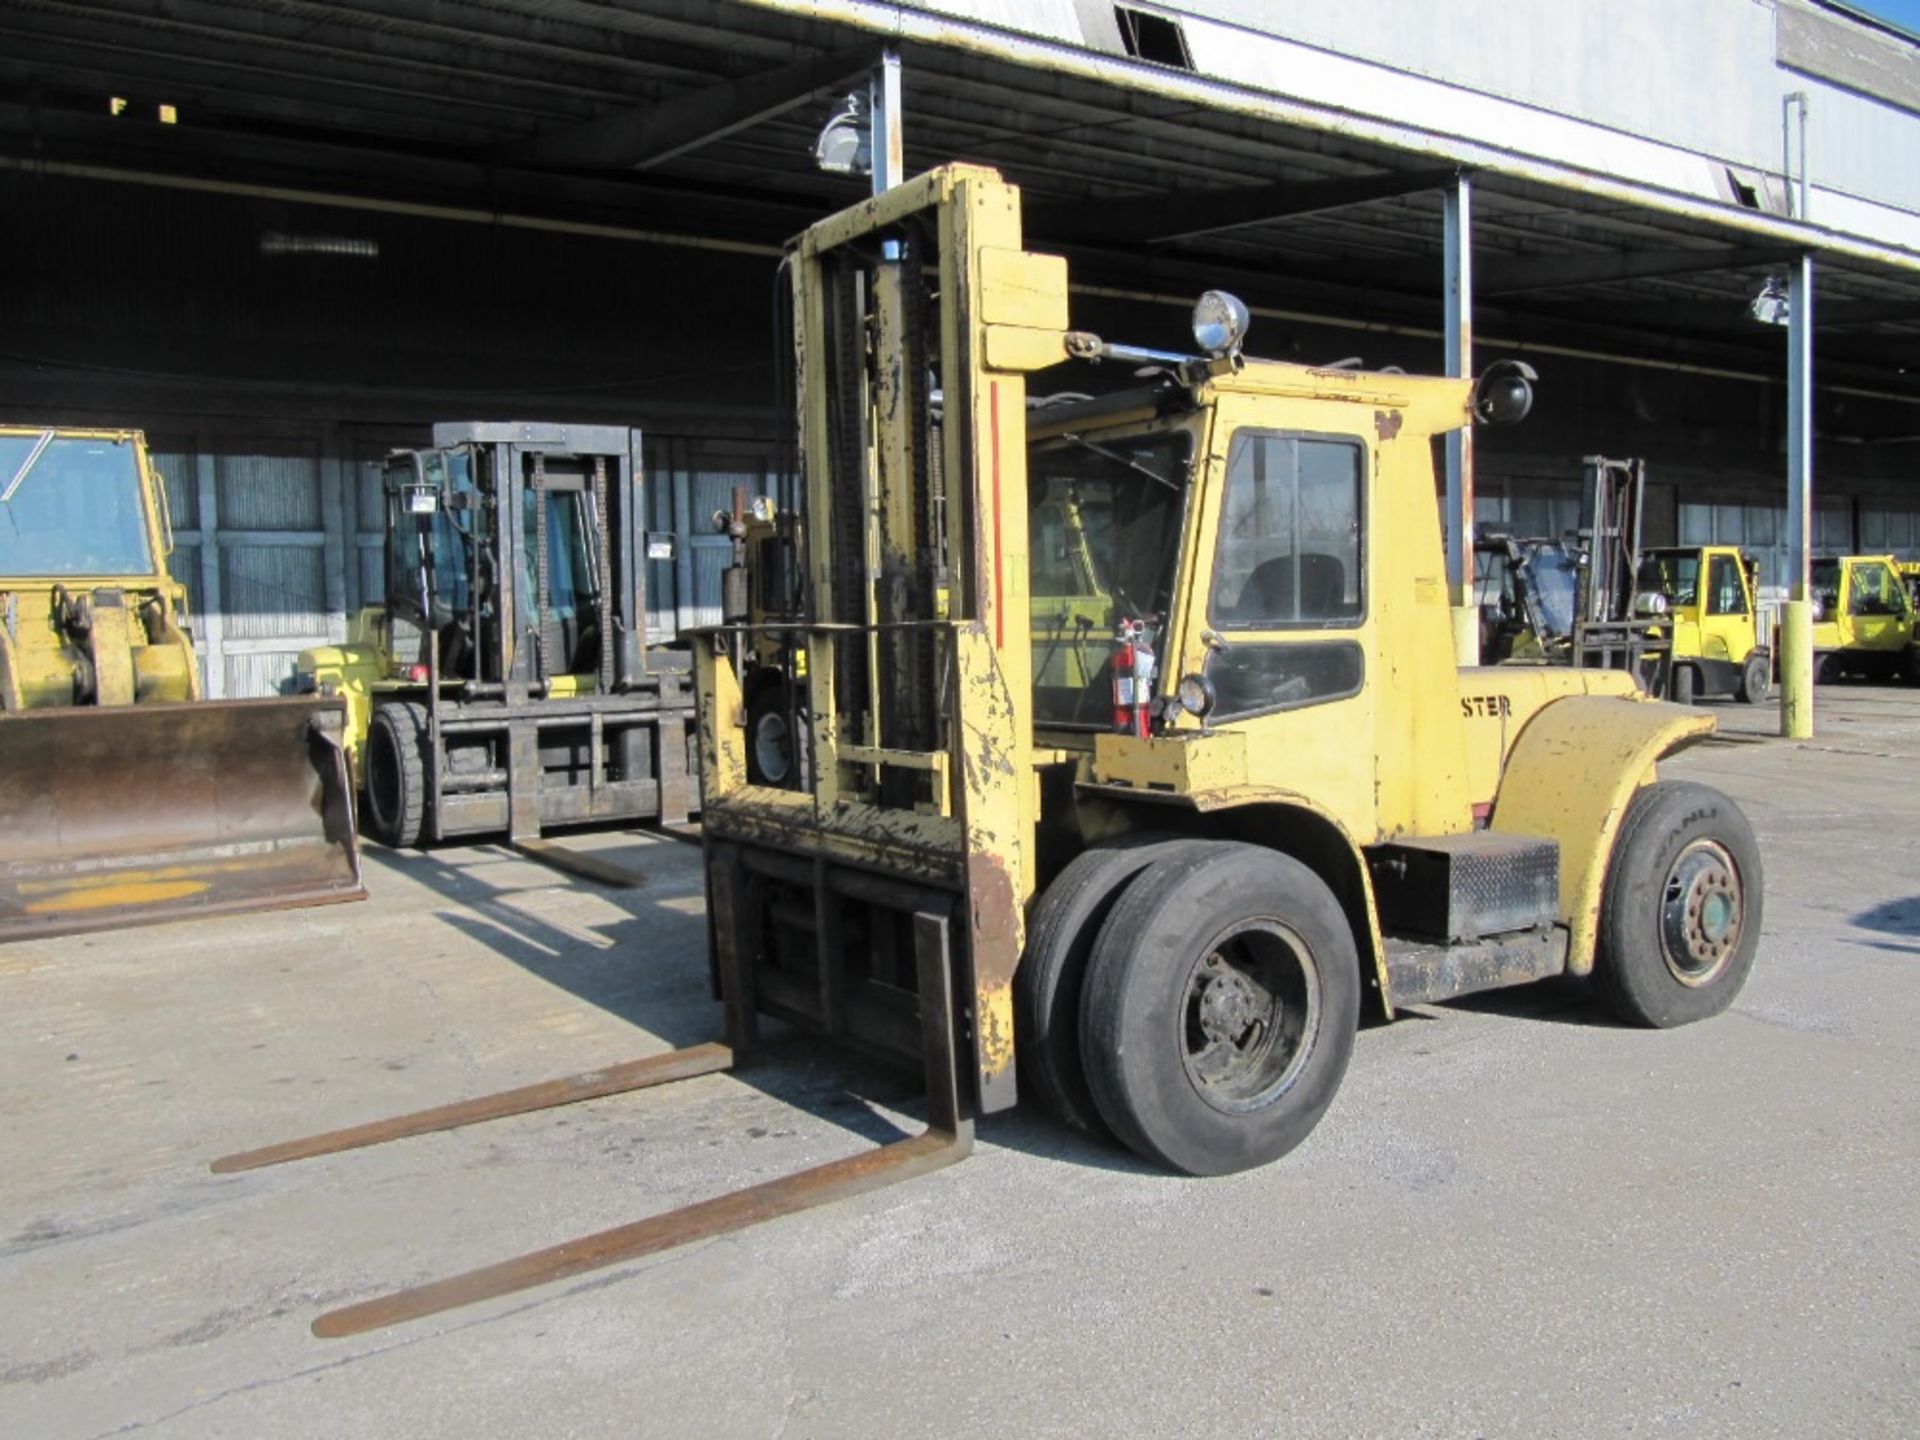 1995 Hyster H200HS Forklift, 6821 hrs. indicated, 23,700 lb. cap., 136" mast ht., 2 stage, diesel